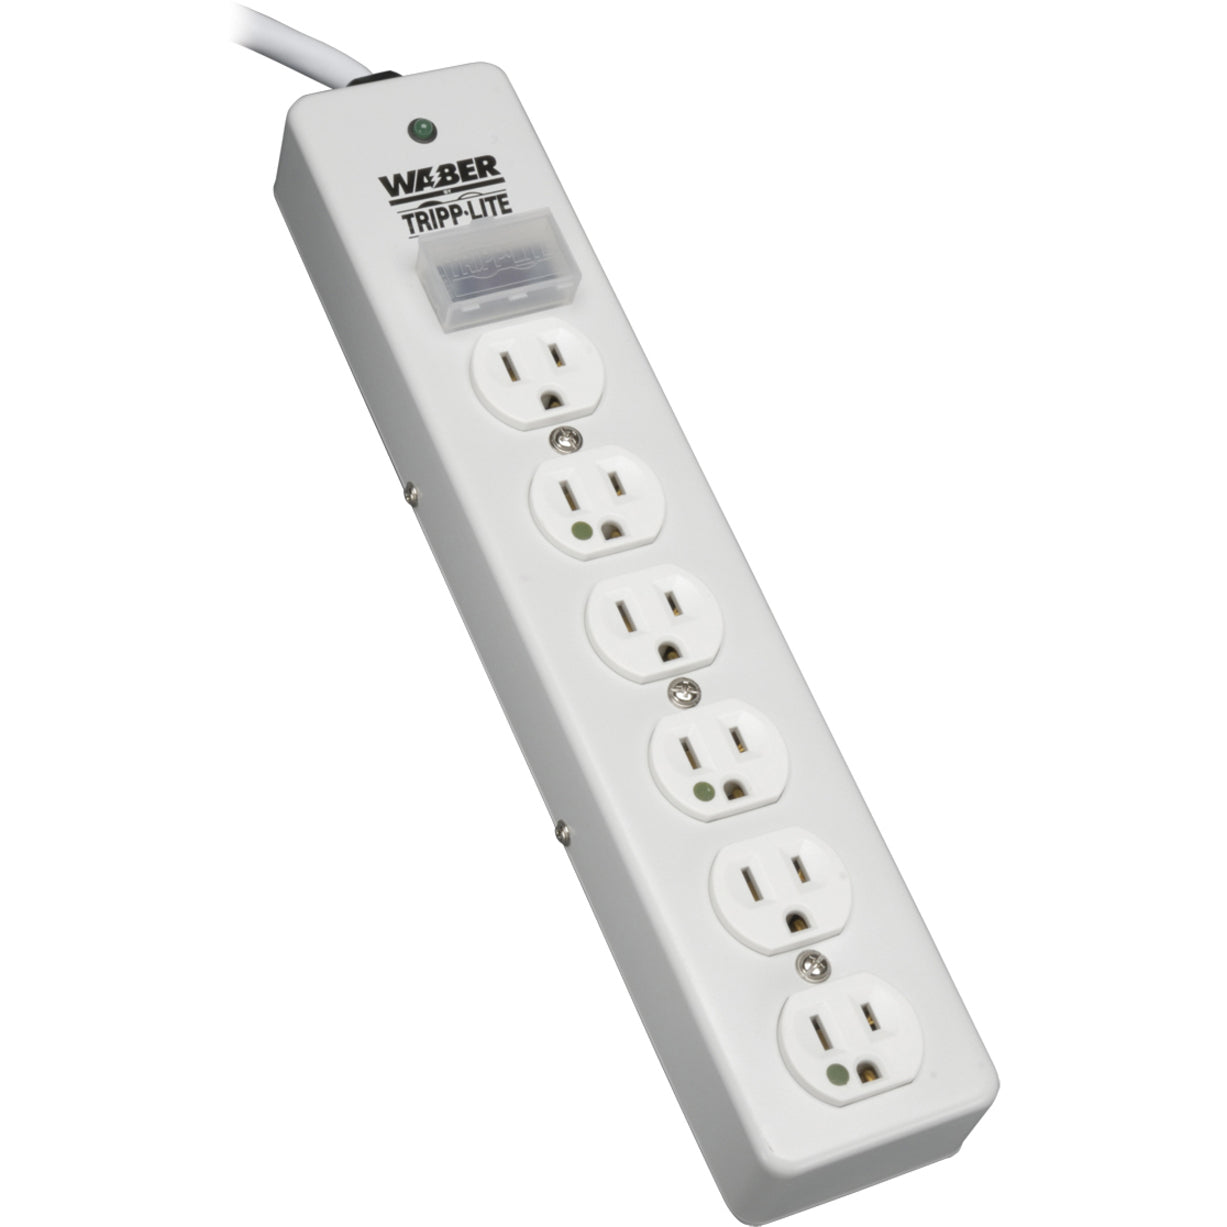 Tripp Lite Hospital-Grade Surge Protector with 6 Hospital-Grade Outlets 10 ft. (3.05 m) Cord 1050 Joules UL 1363 Not for Patient-Care Rooms